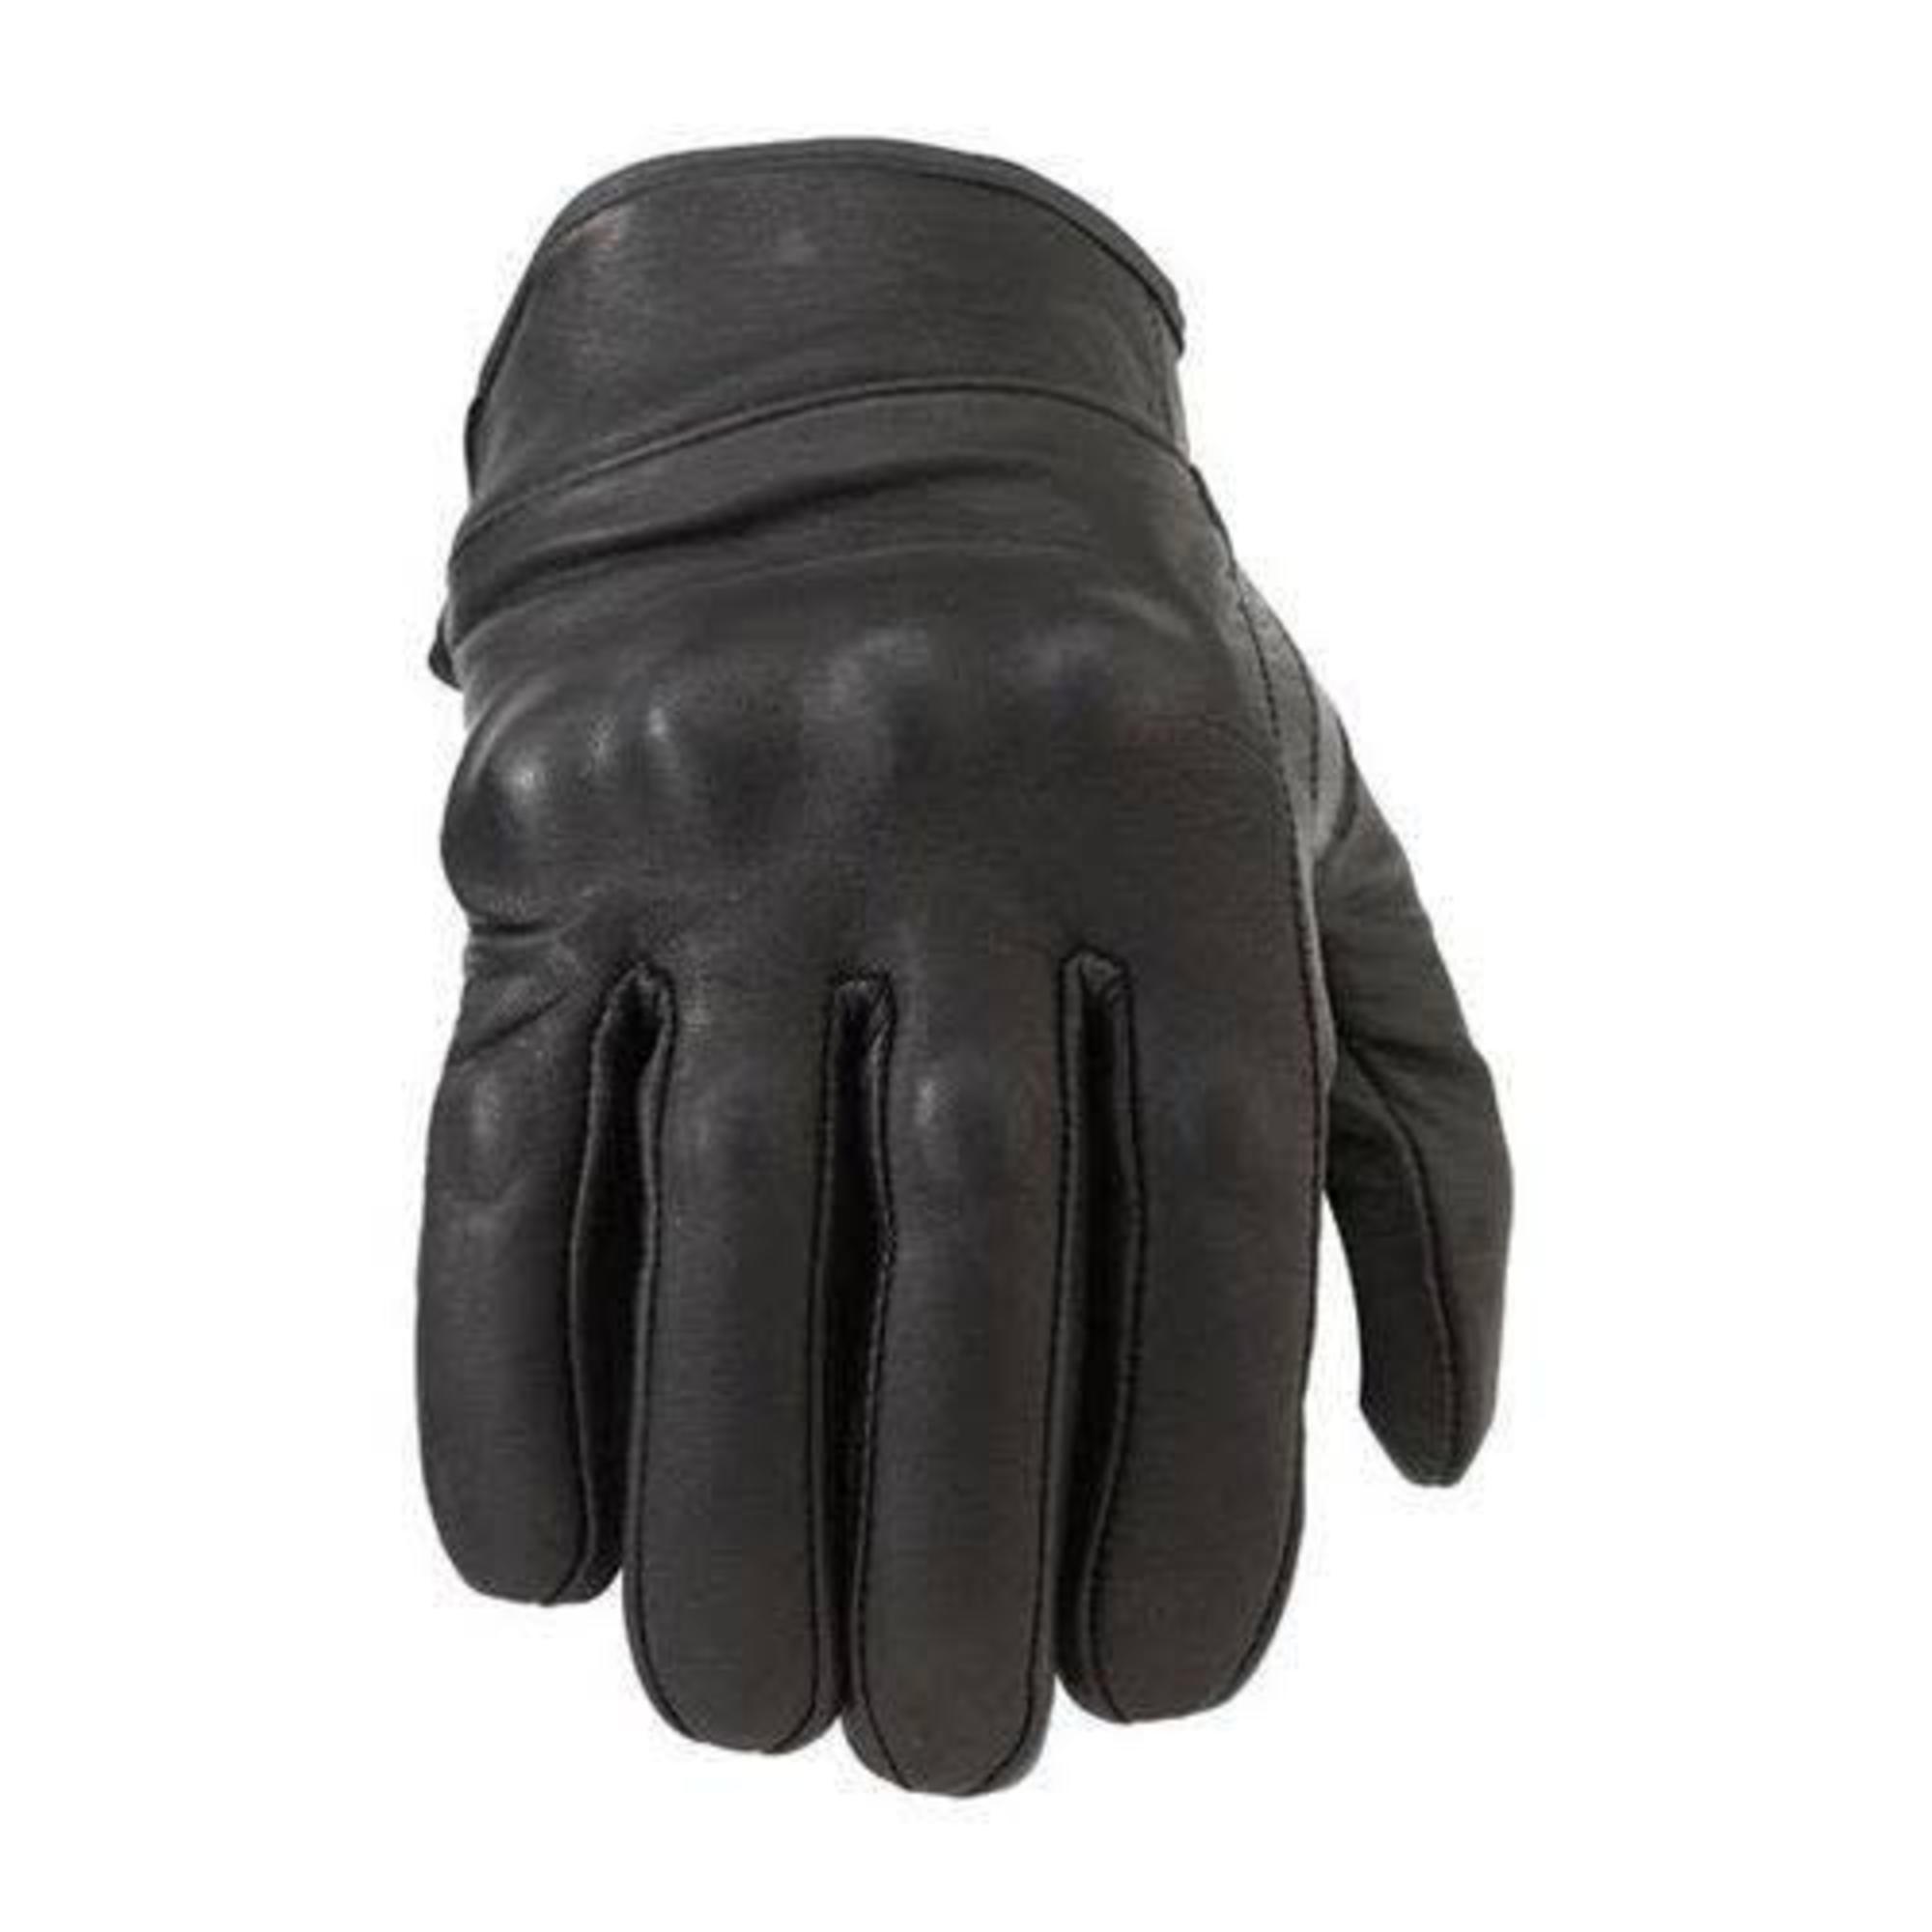 z1r leather gloves for womens 270